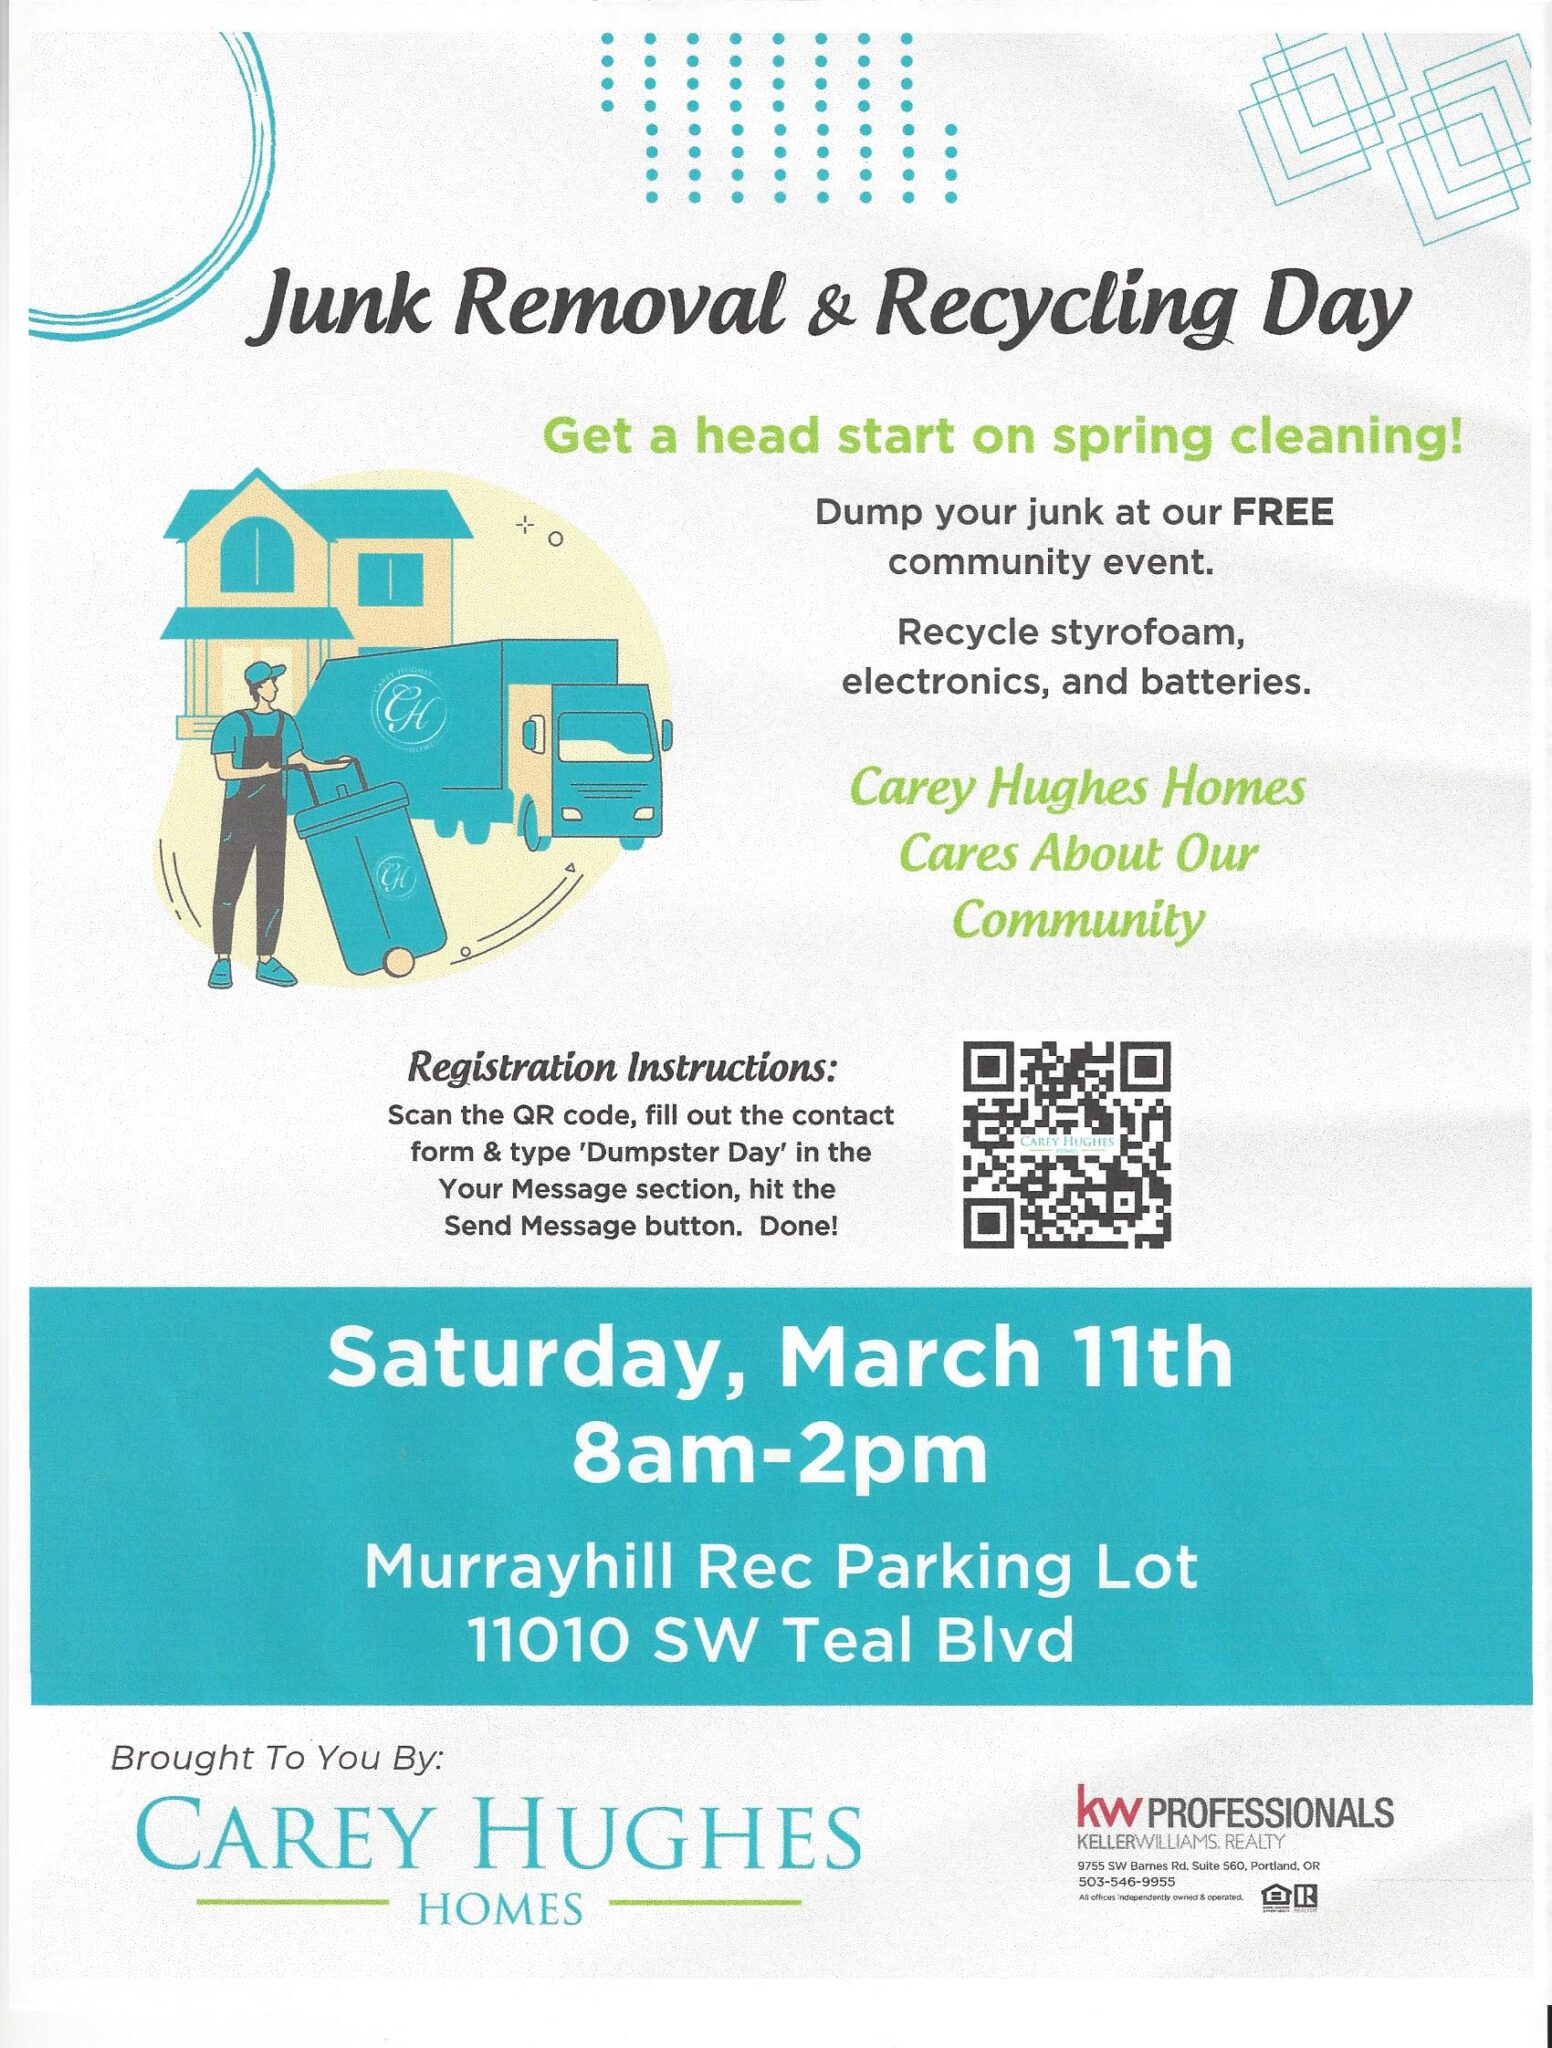 Murrayhill Recycle & Junk Removal Day!